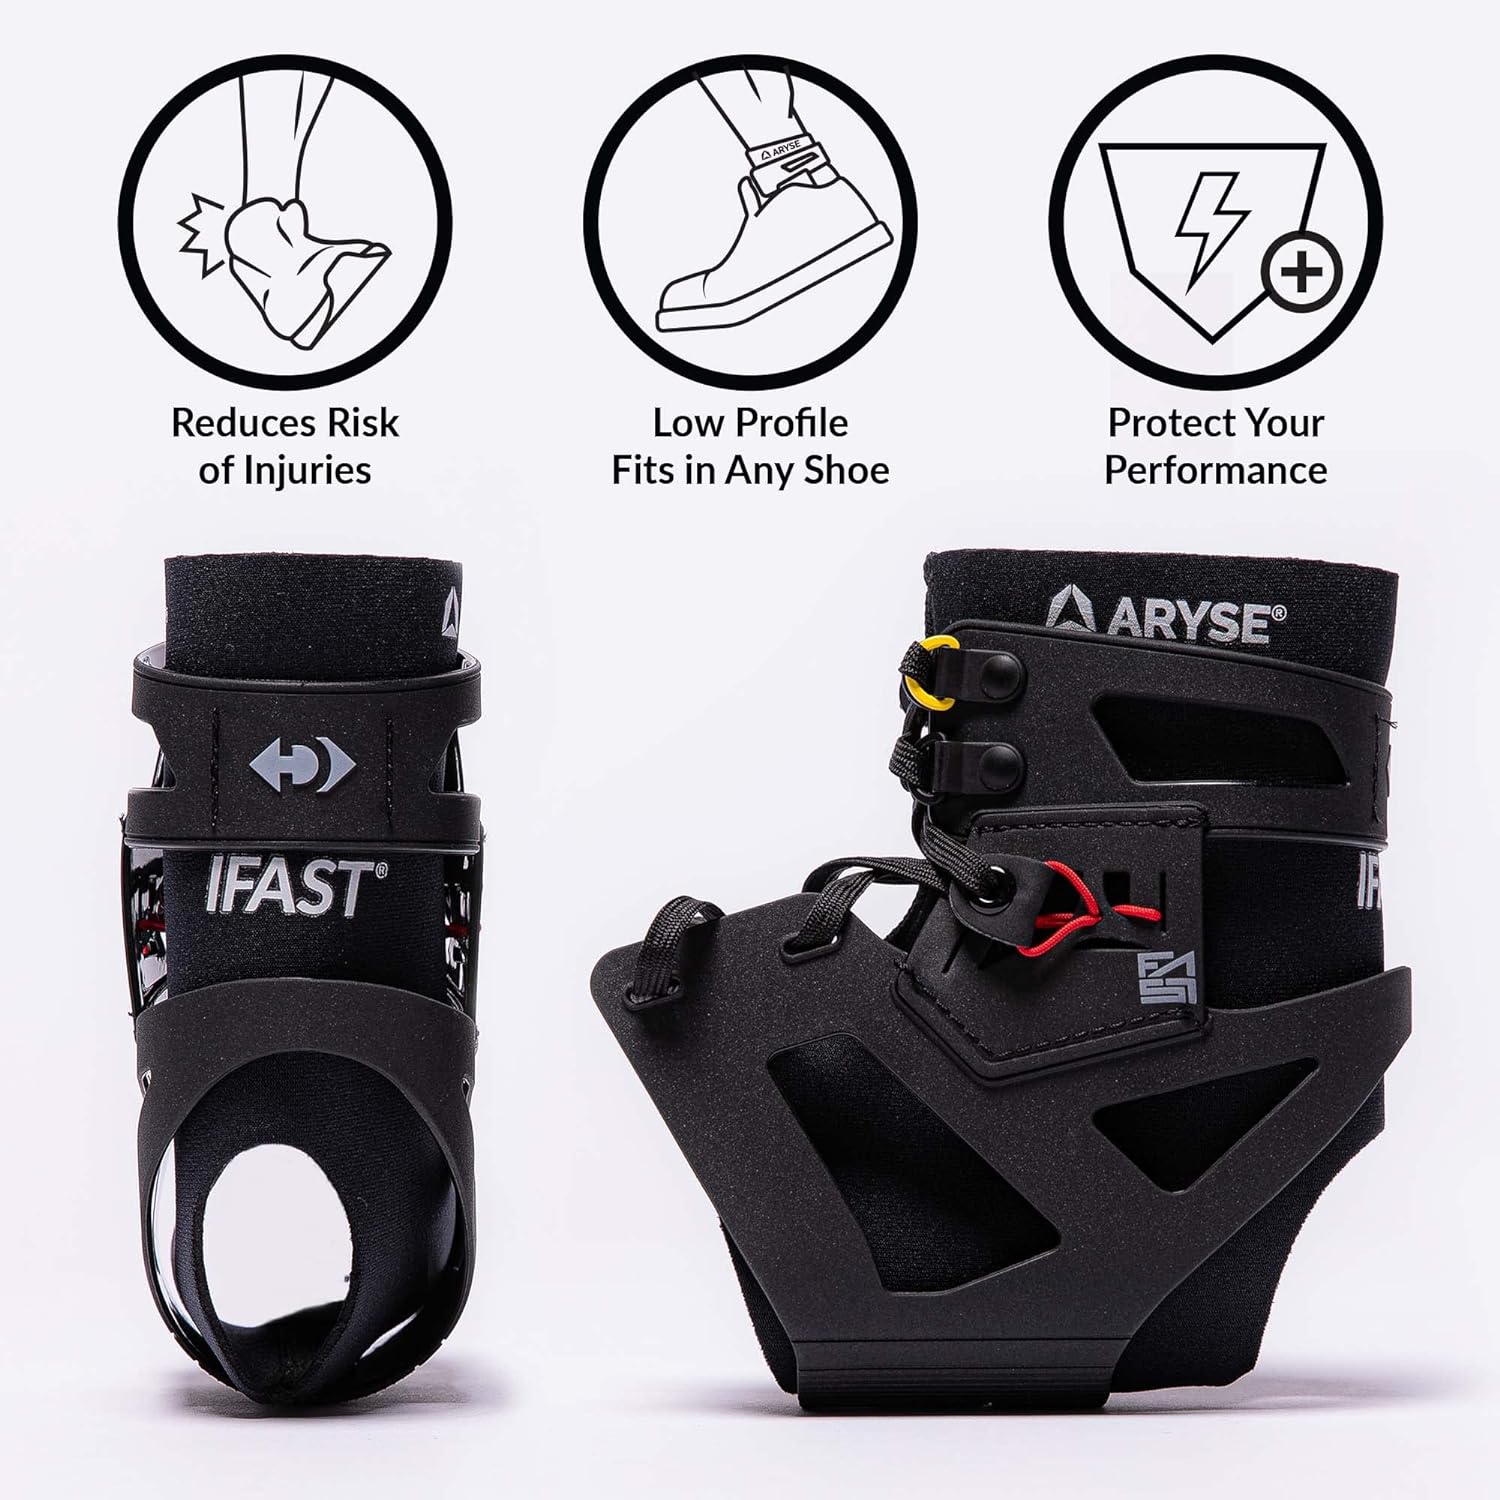 Generic ARYSE IFAST - Ankle Stabilizer Brace - Superior Ankle Support for Men and Women. Basketball, Baseball, Running, Football, Volle